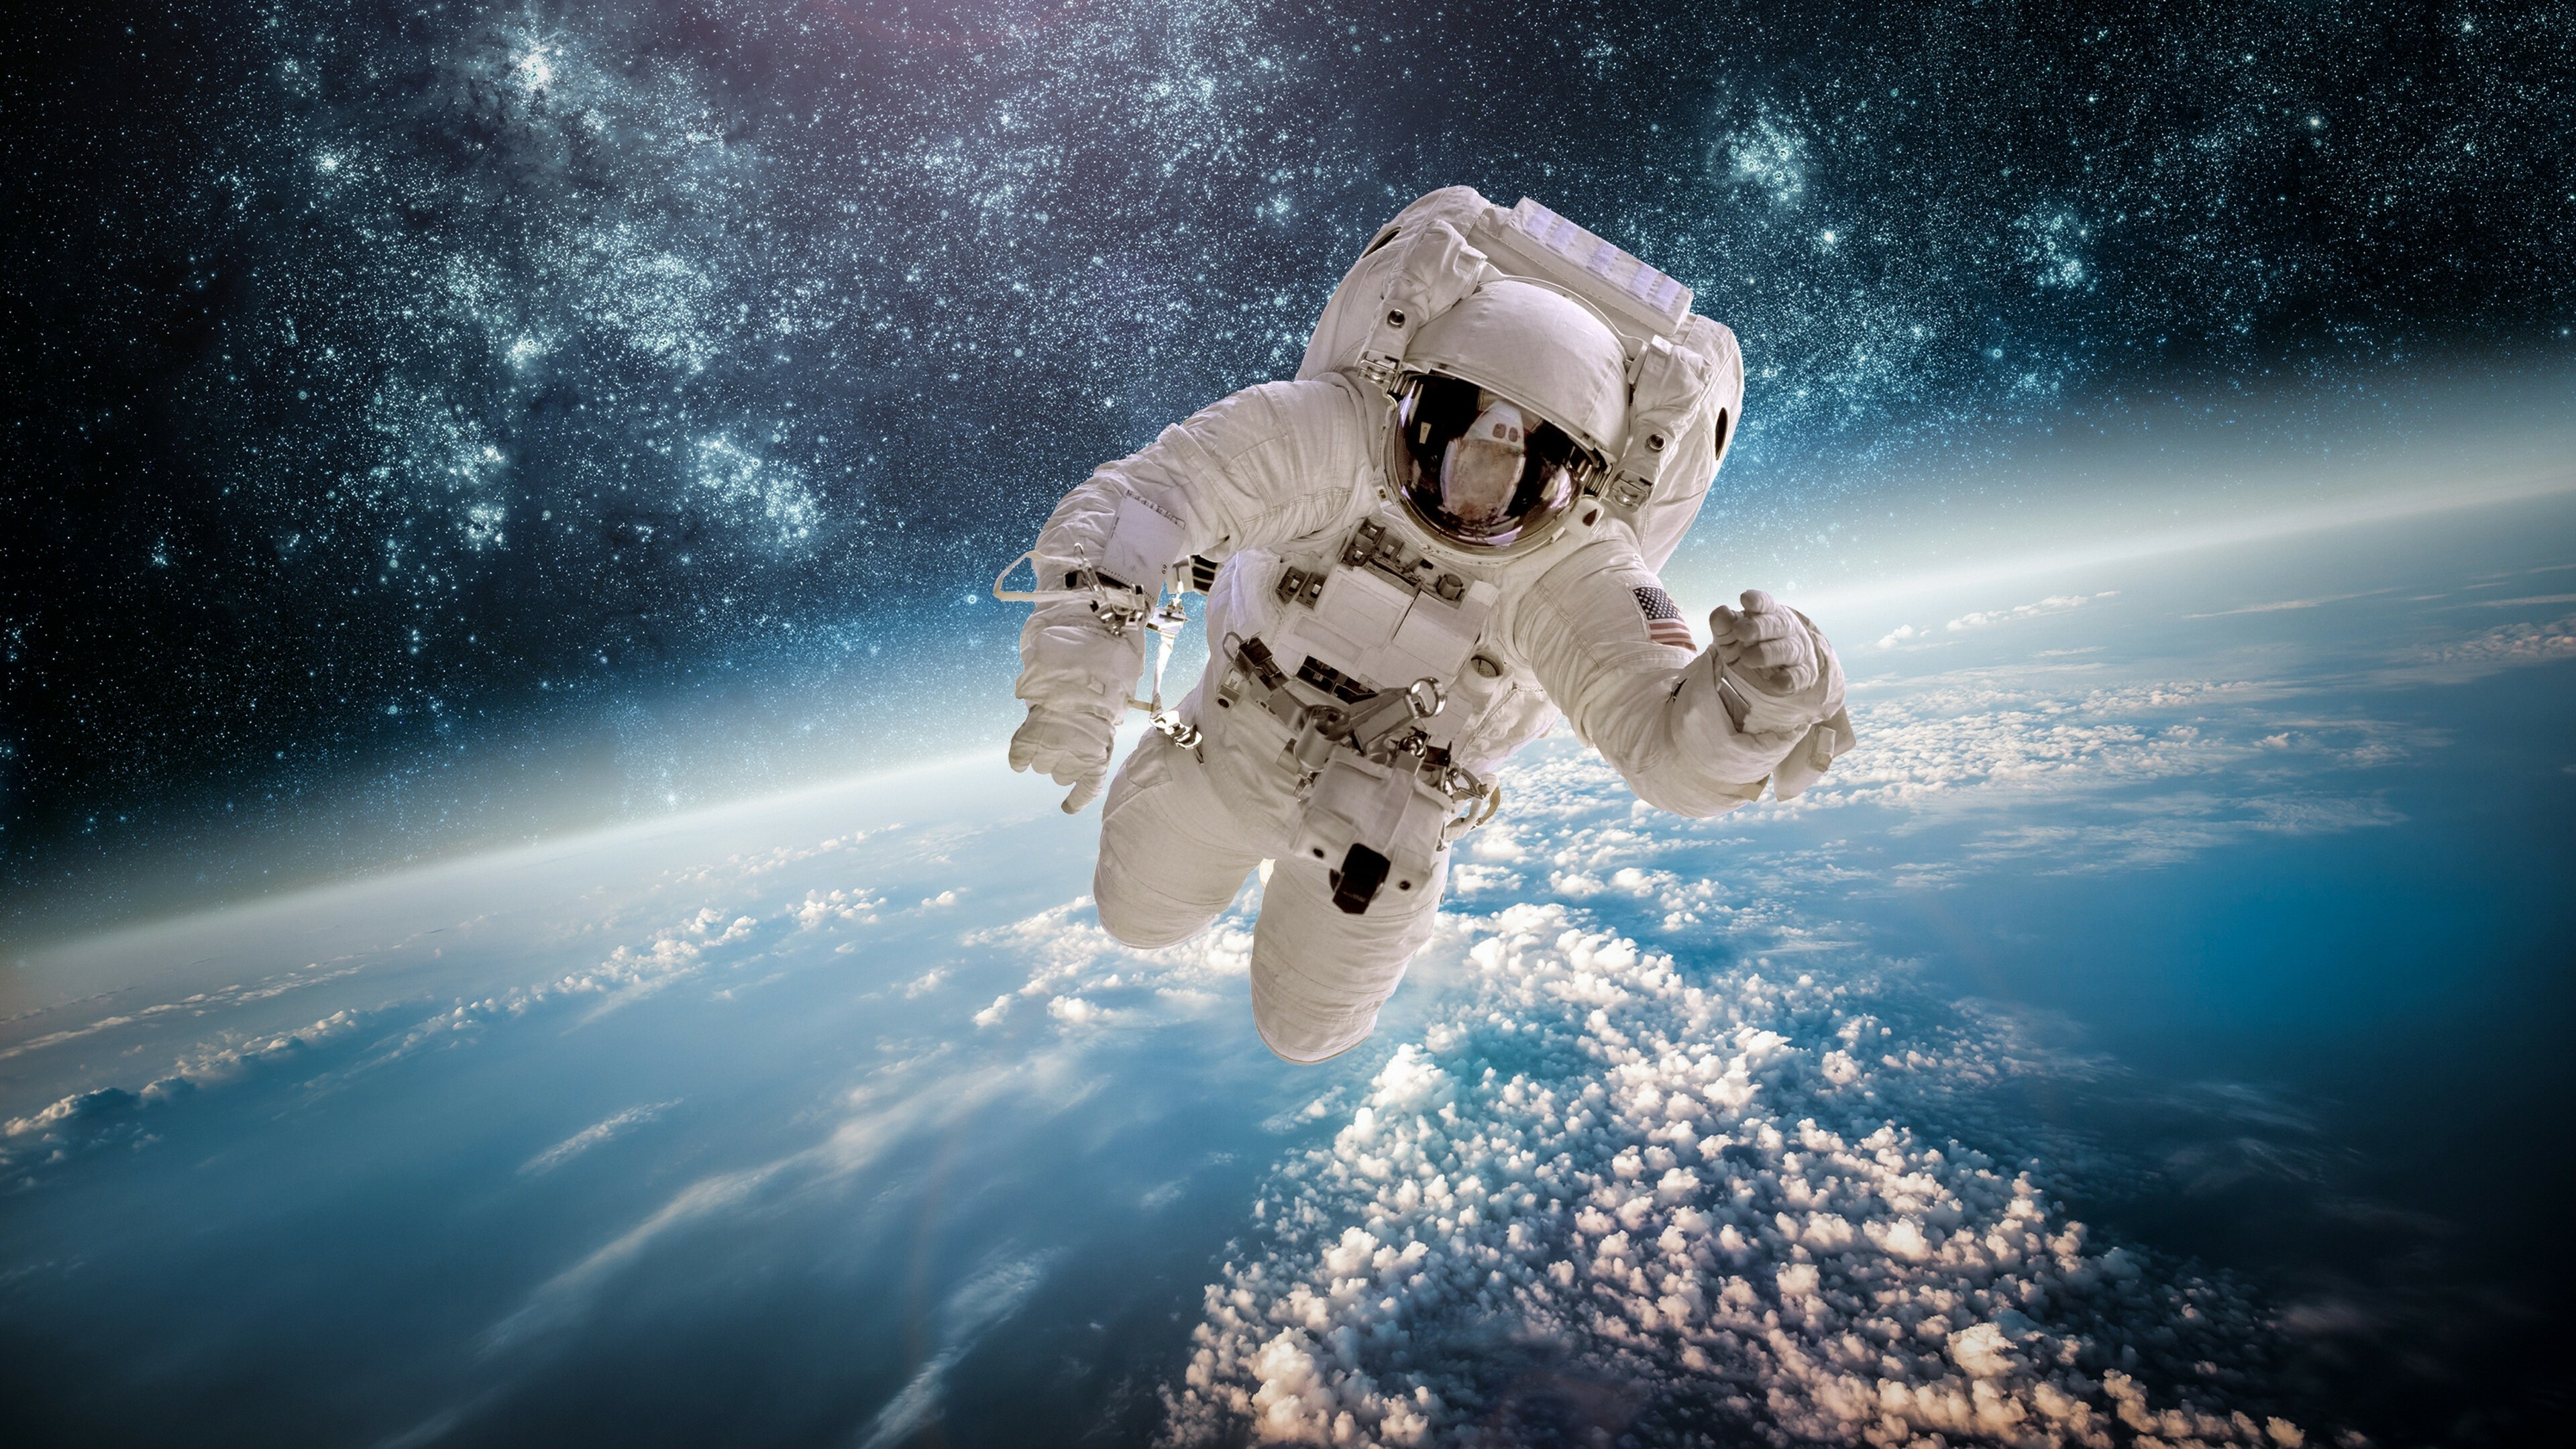 Astronaut: Anyone who travels into space, A Manned Maneuvering Unit. 3840x2160 4K Background.